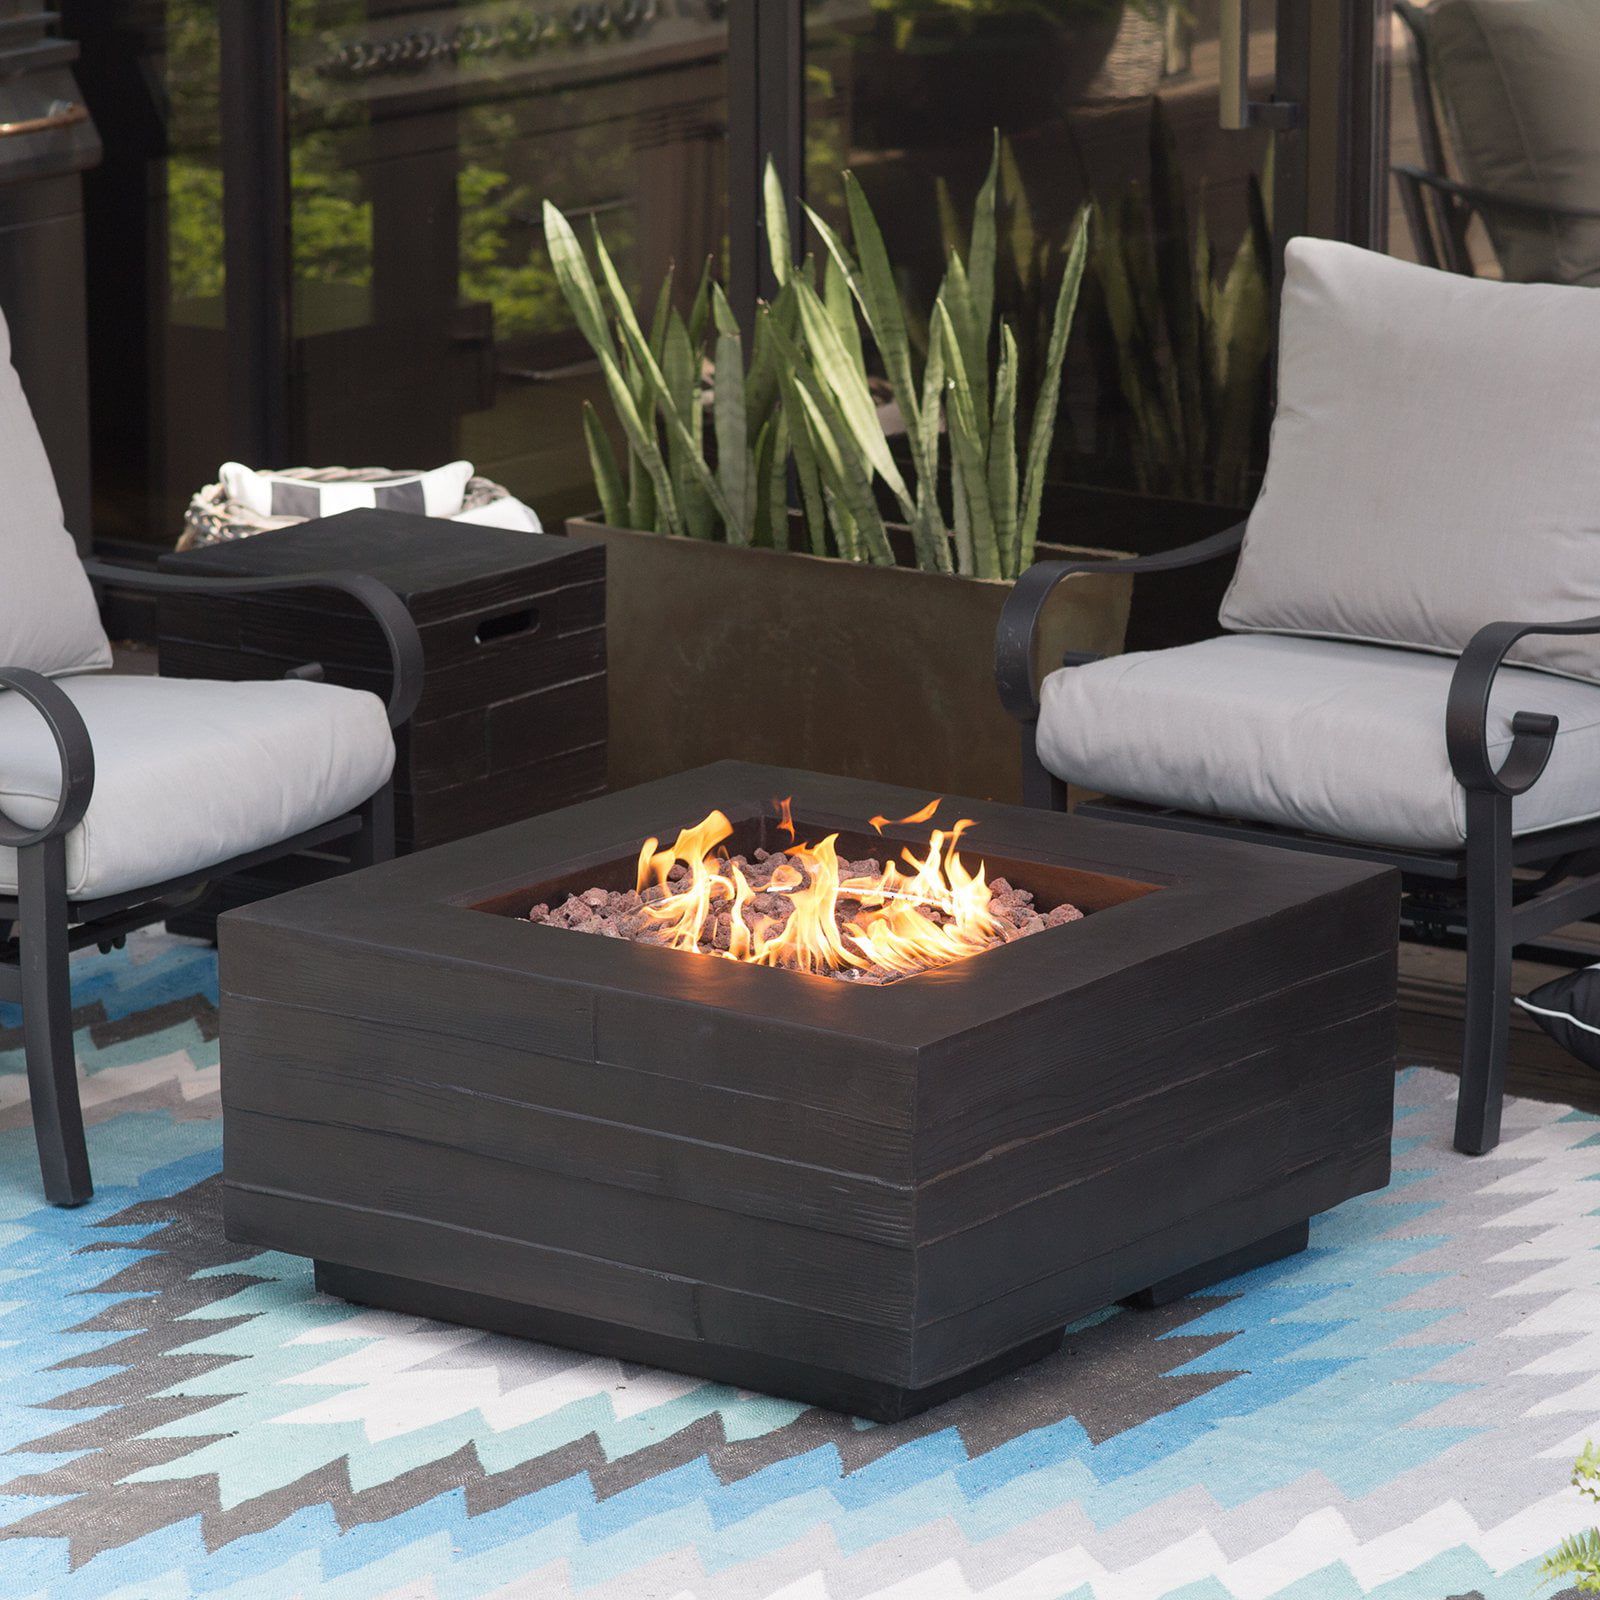 Red Ember Bozeman Square Propane Fire, Hayneedle Fire Pit Table